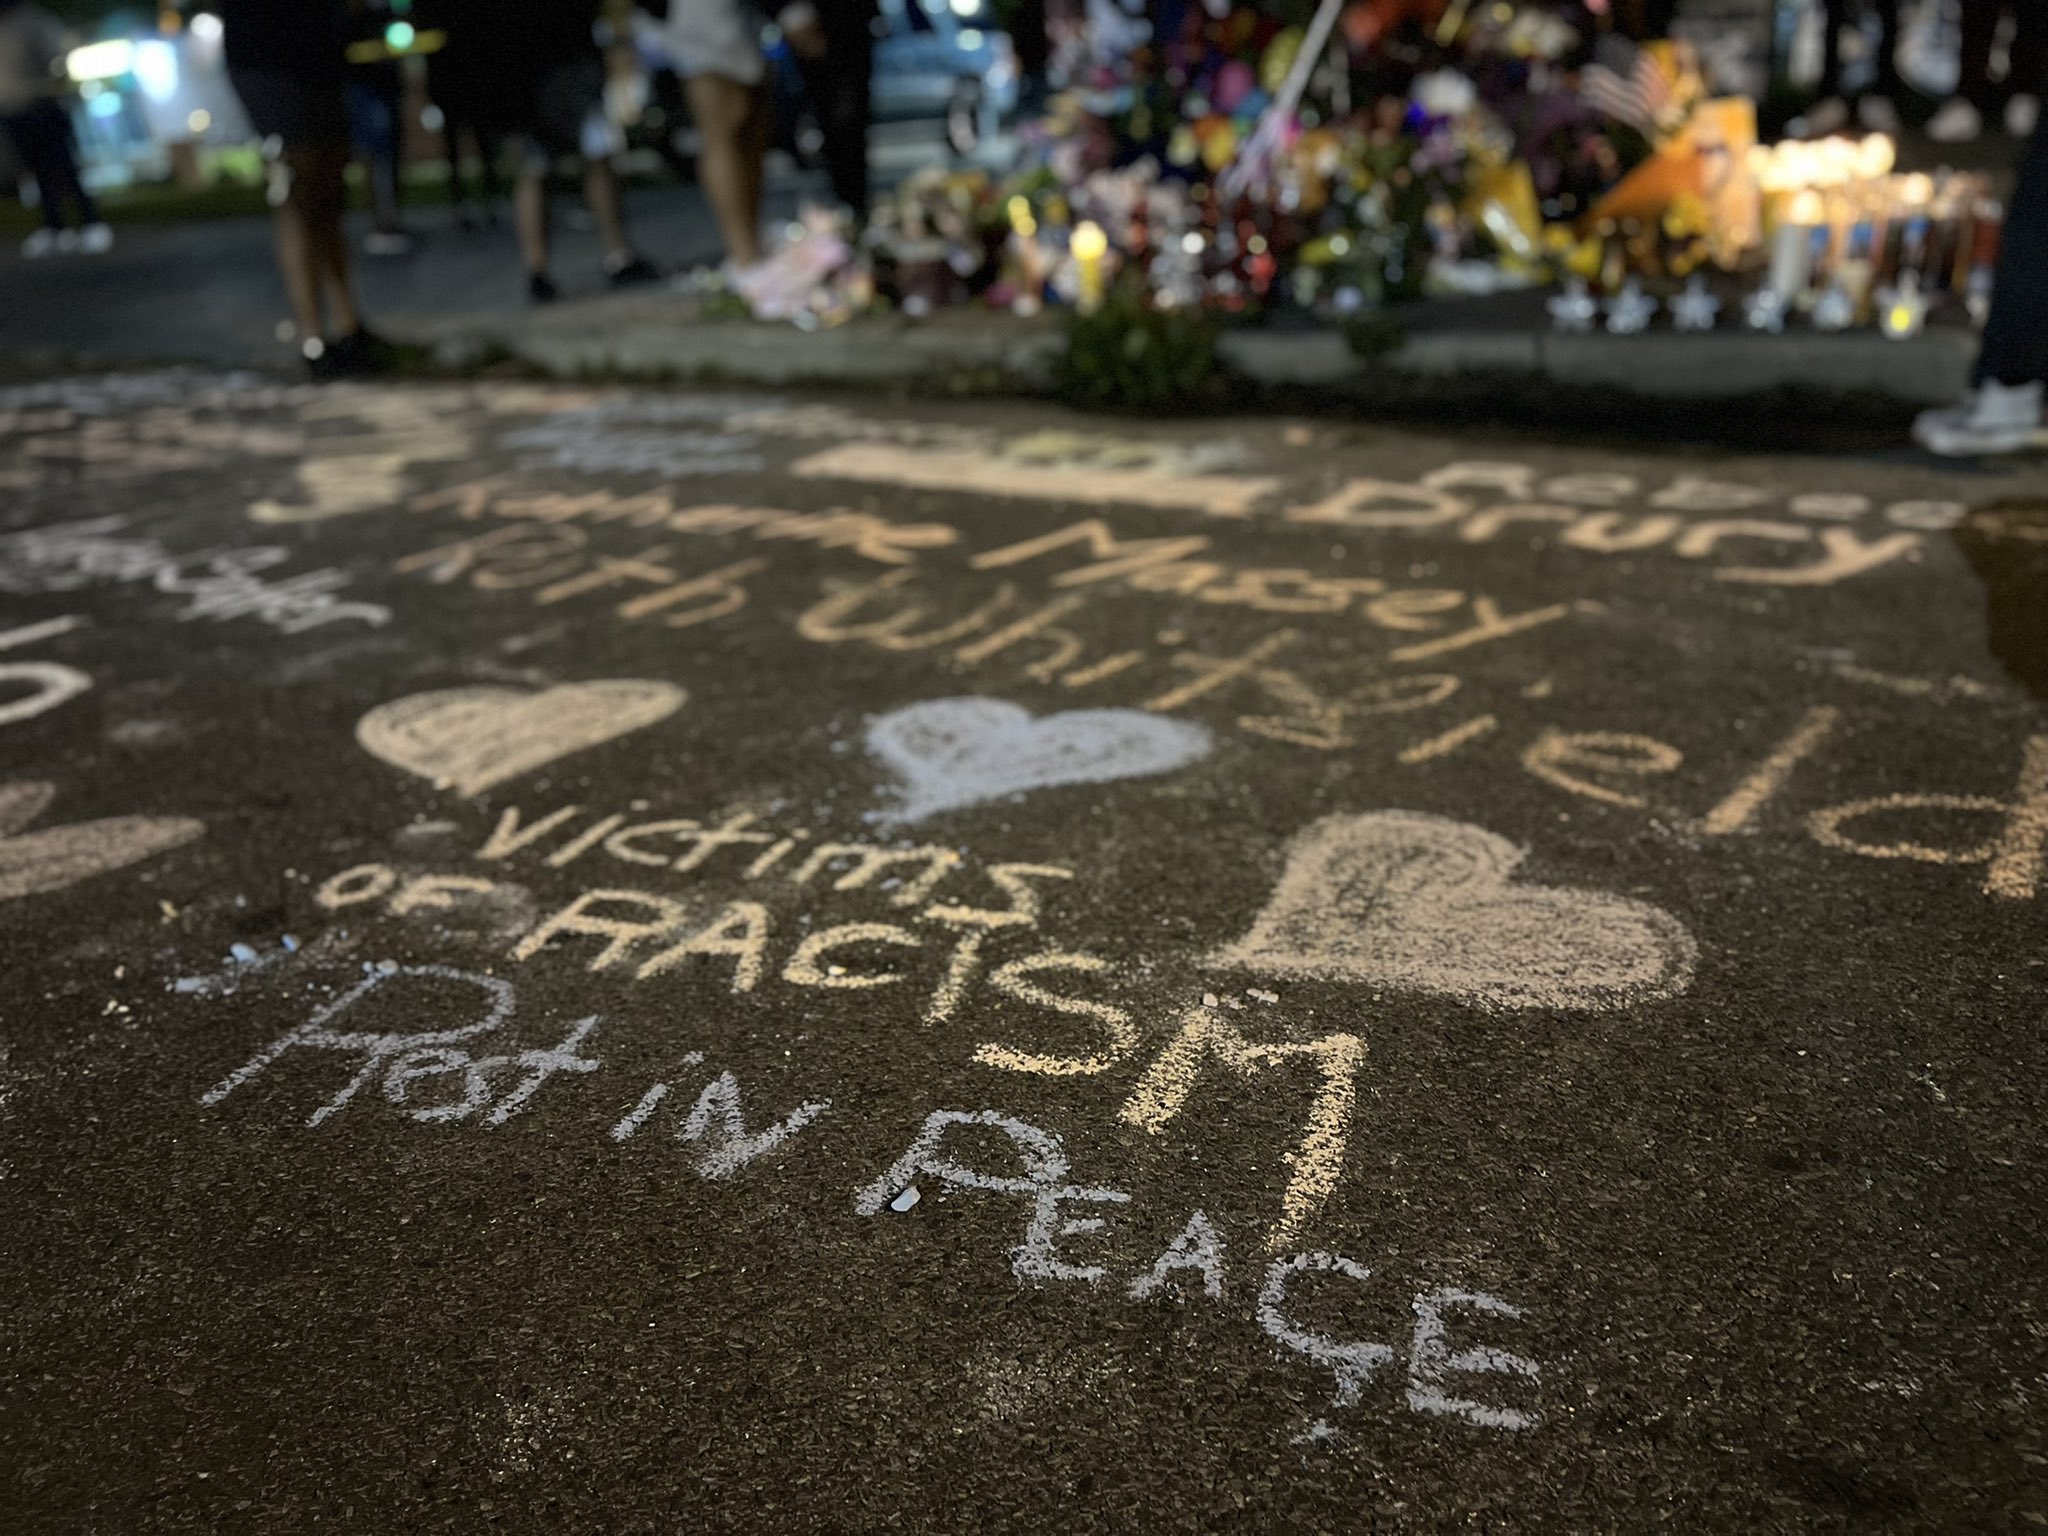 The names of the 10 victims killed at the Buffalo supermarket are written on the street in chalk. It’s part of a growing memorial created by family, friends, and total strangers. (Credit: Twitter)